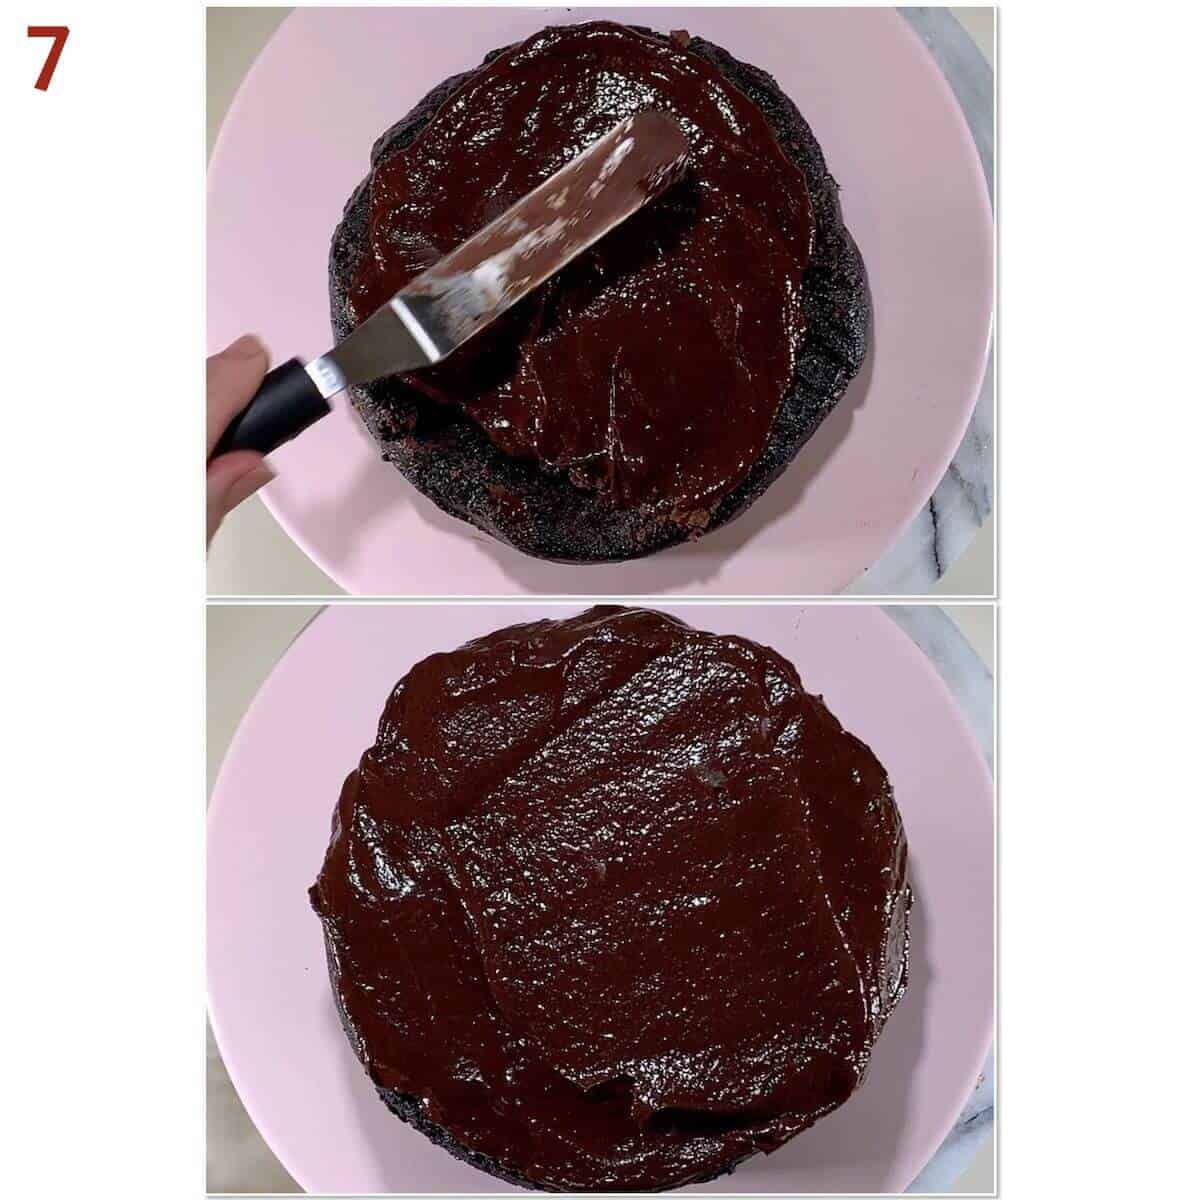 Collage of spreading chocolate ganache on cake layers.